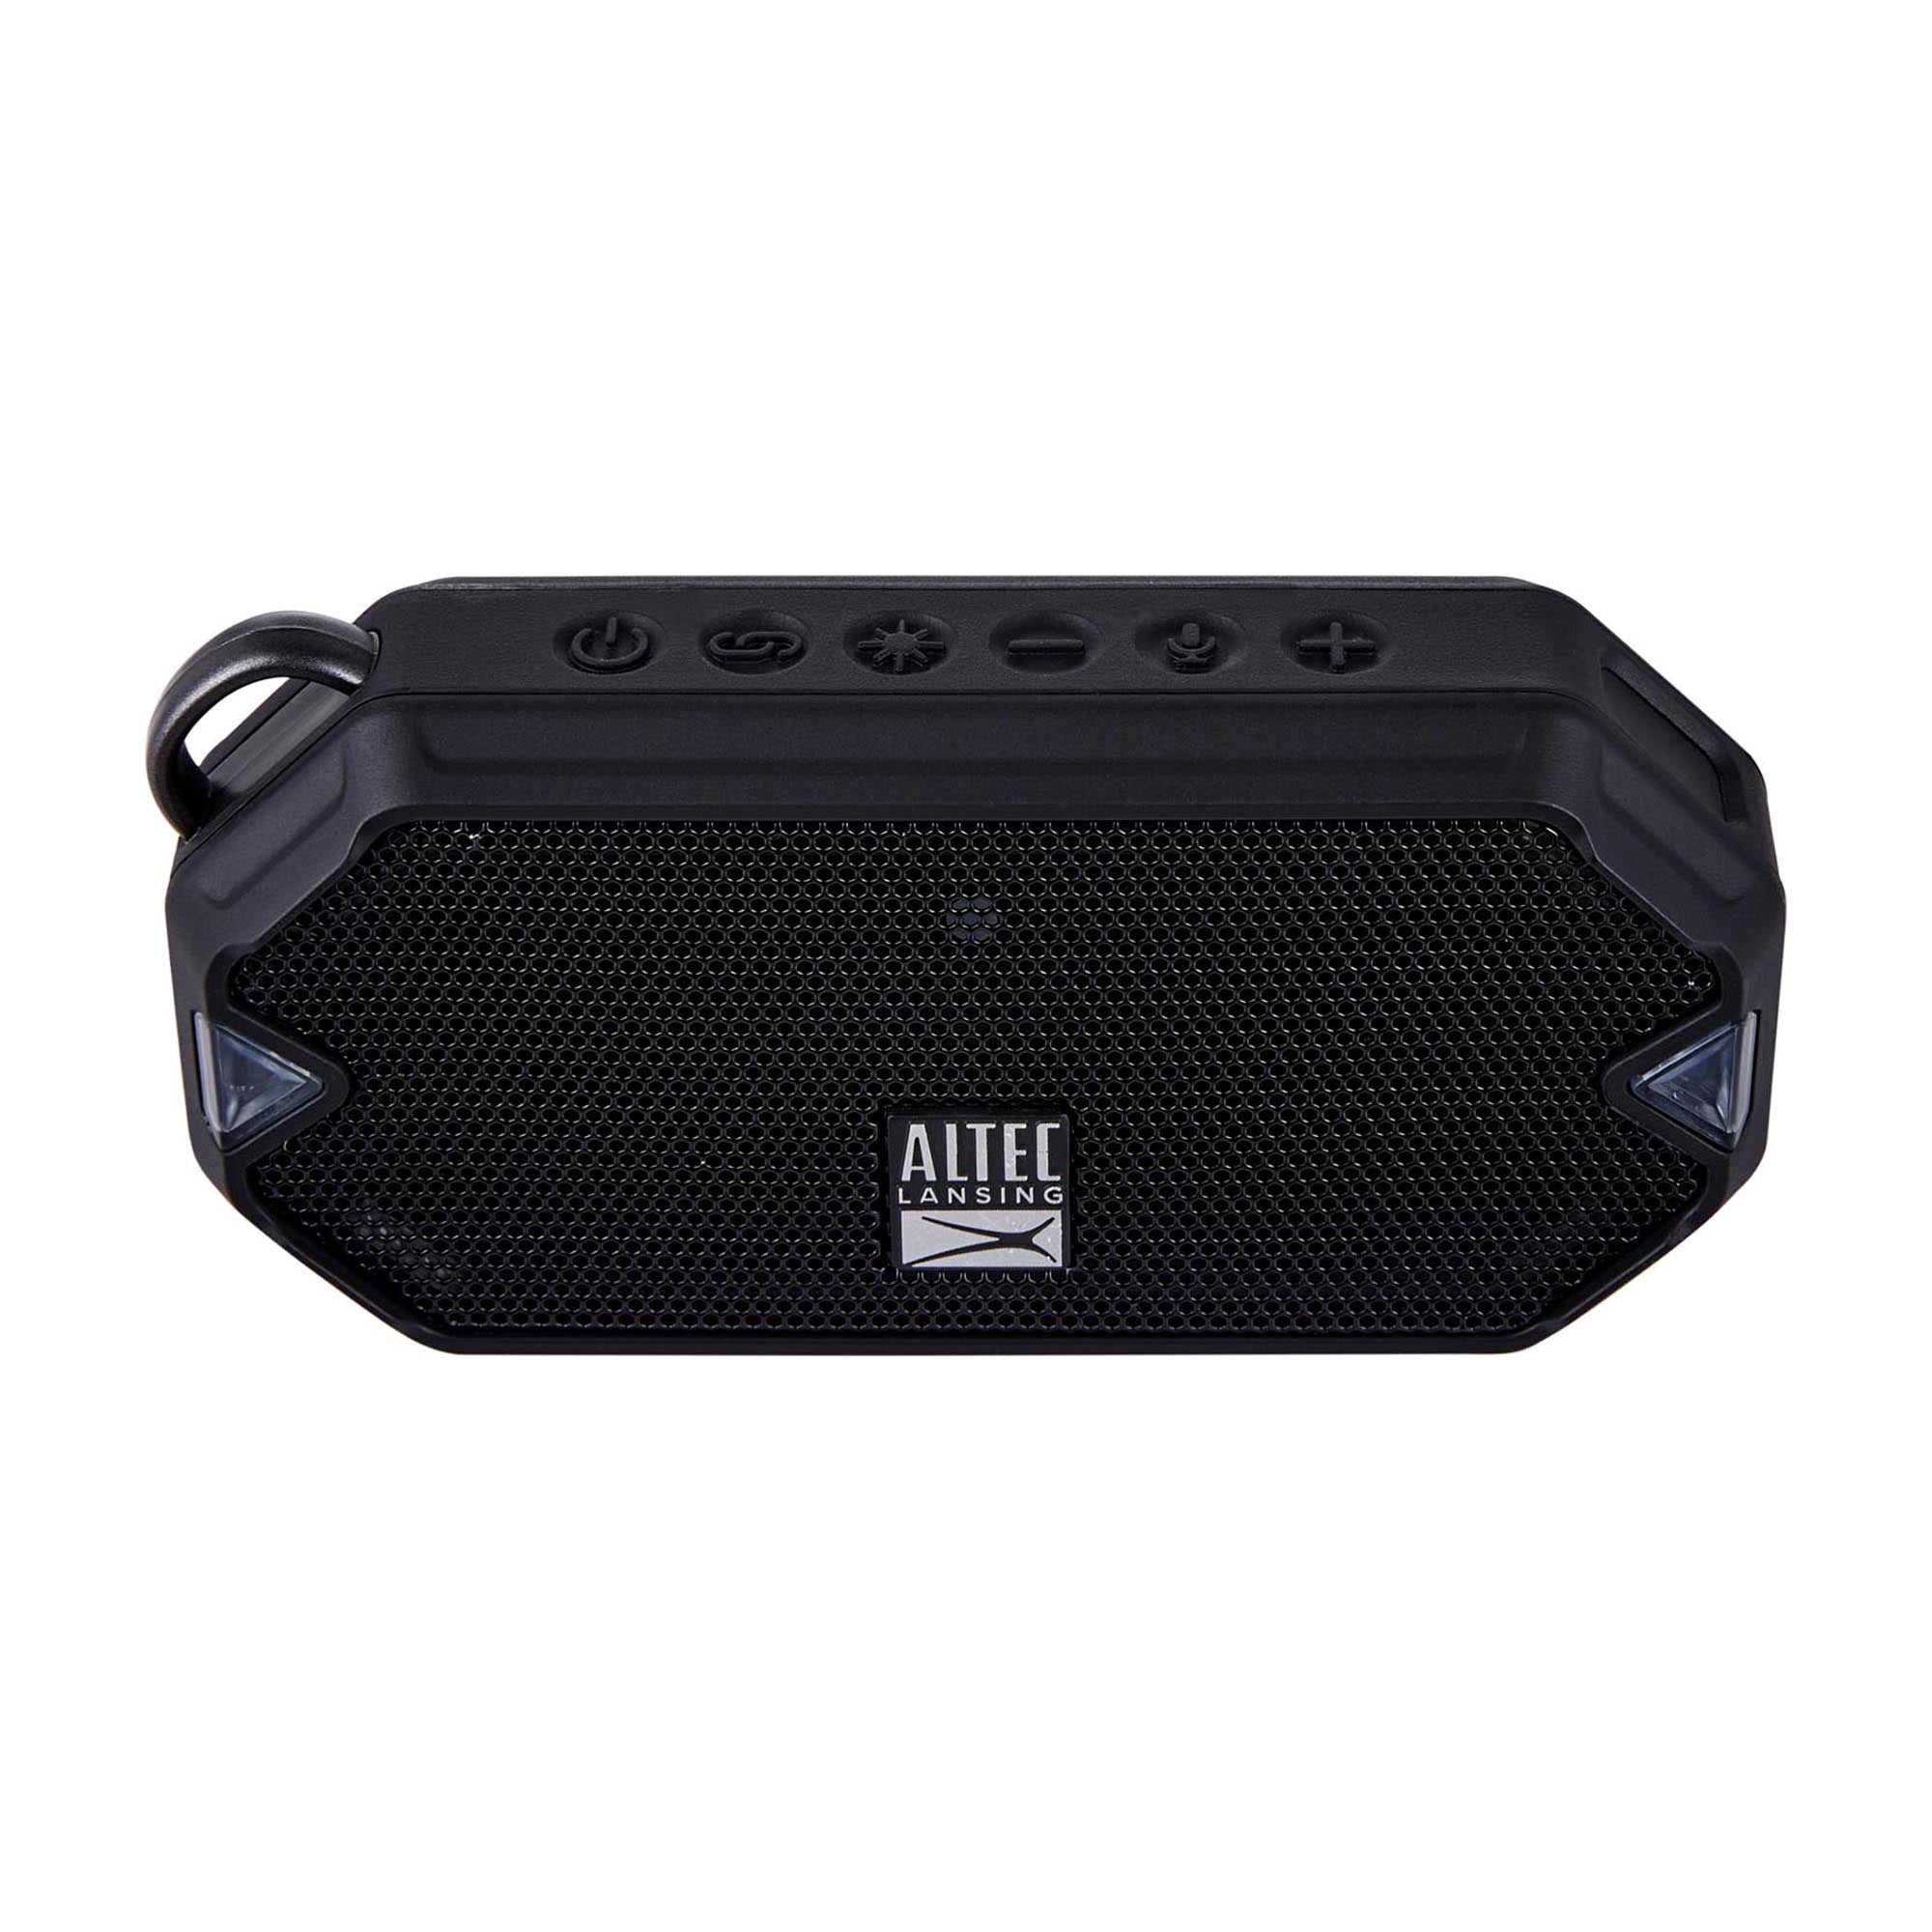 Altec Lansing | Top Speakers, Headphones, and Electronics Since 1927